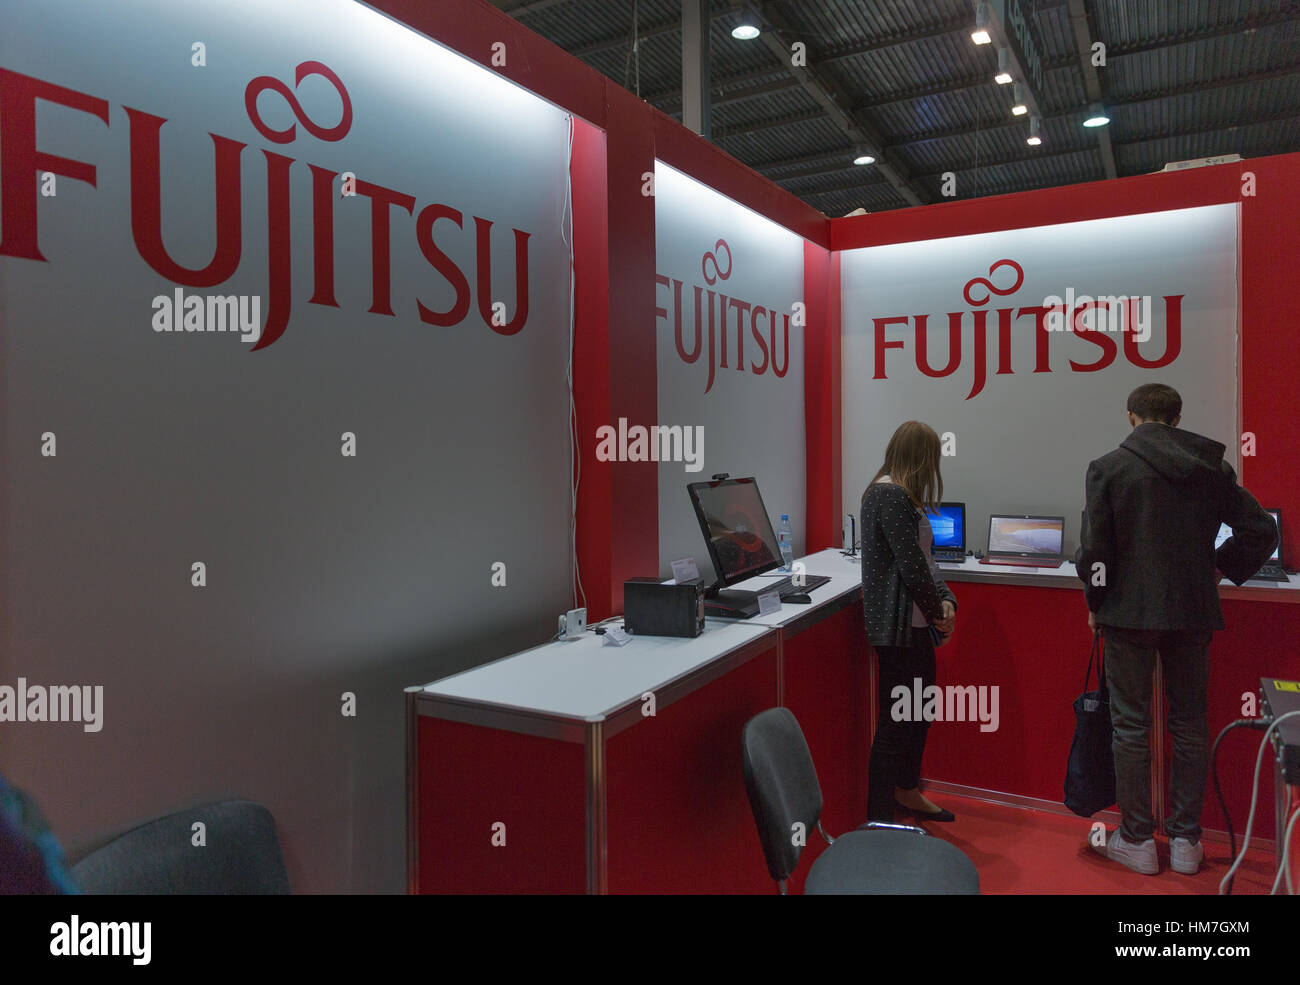 KIEV, UKRAINE - OCTOBER 11, 2015: People visit Fujitsu, Japanese information technology company booth during CEE 2015, the largest electronics trade s Stock Photo